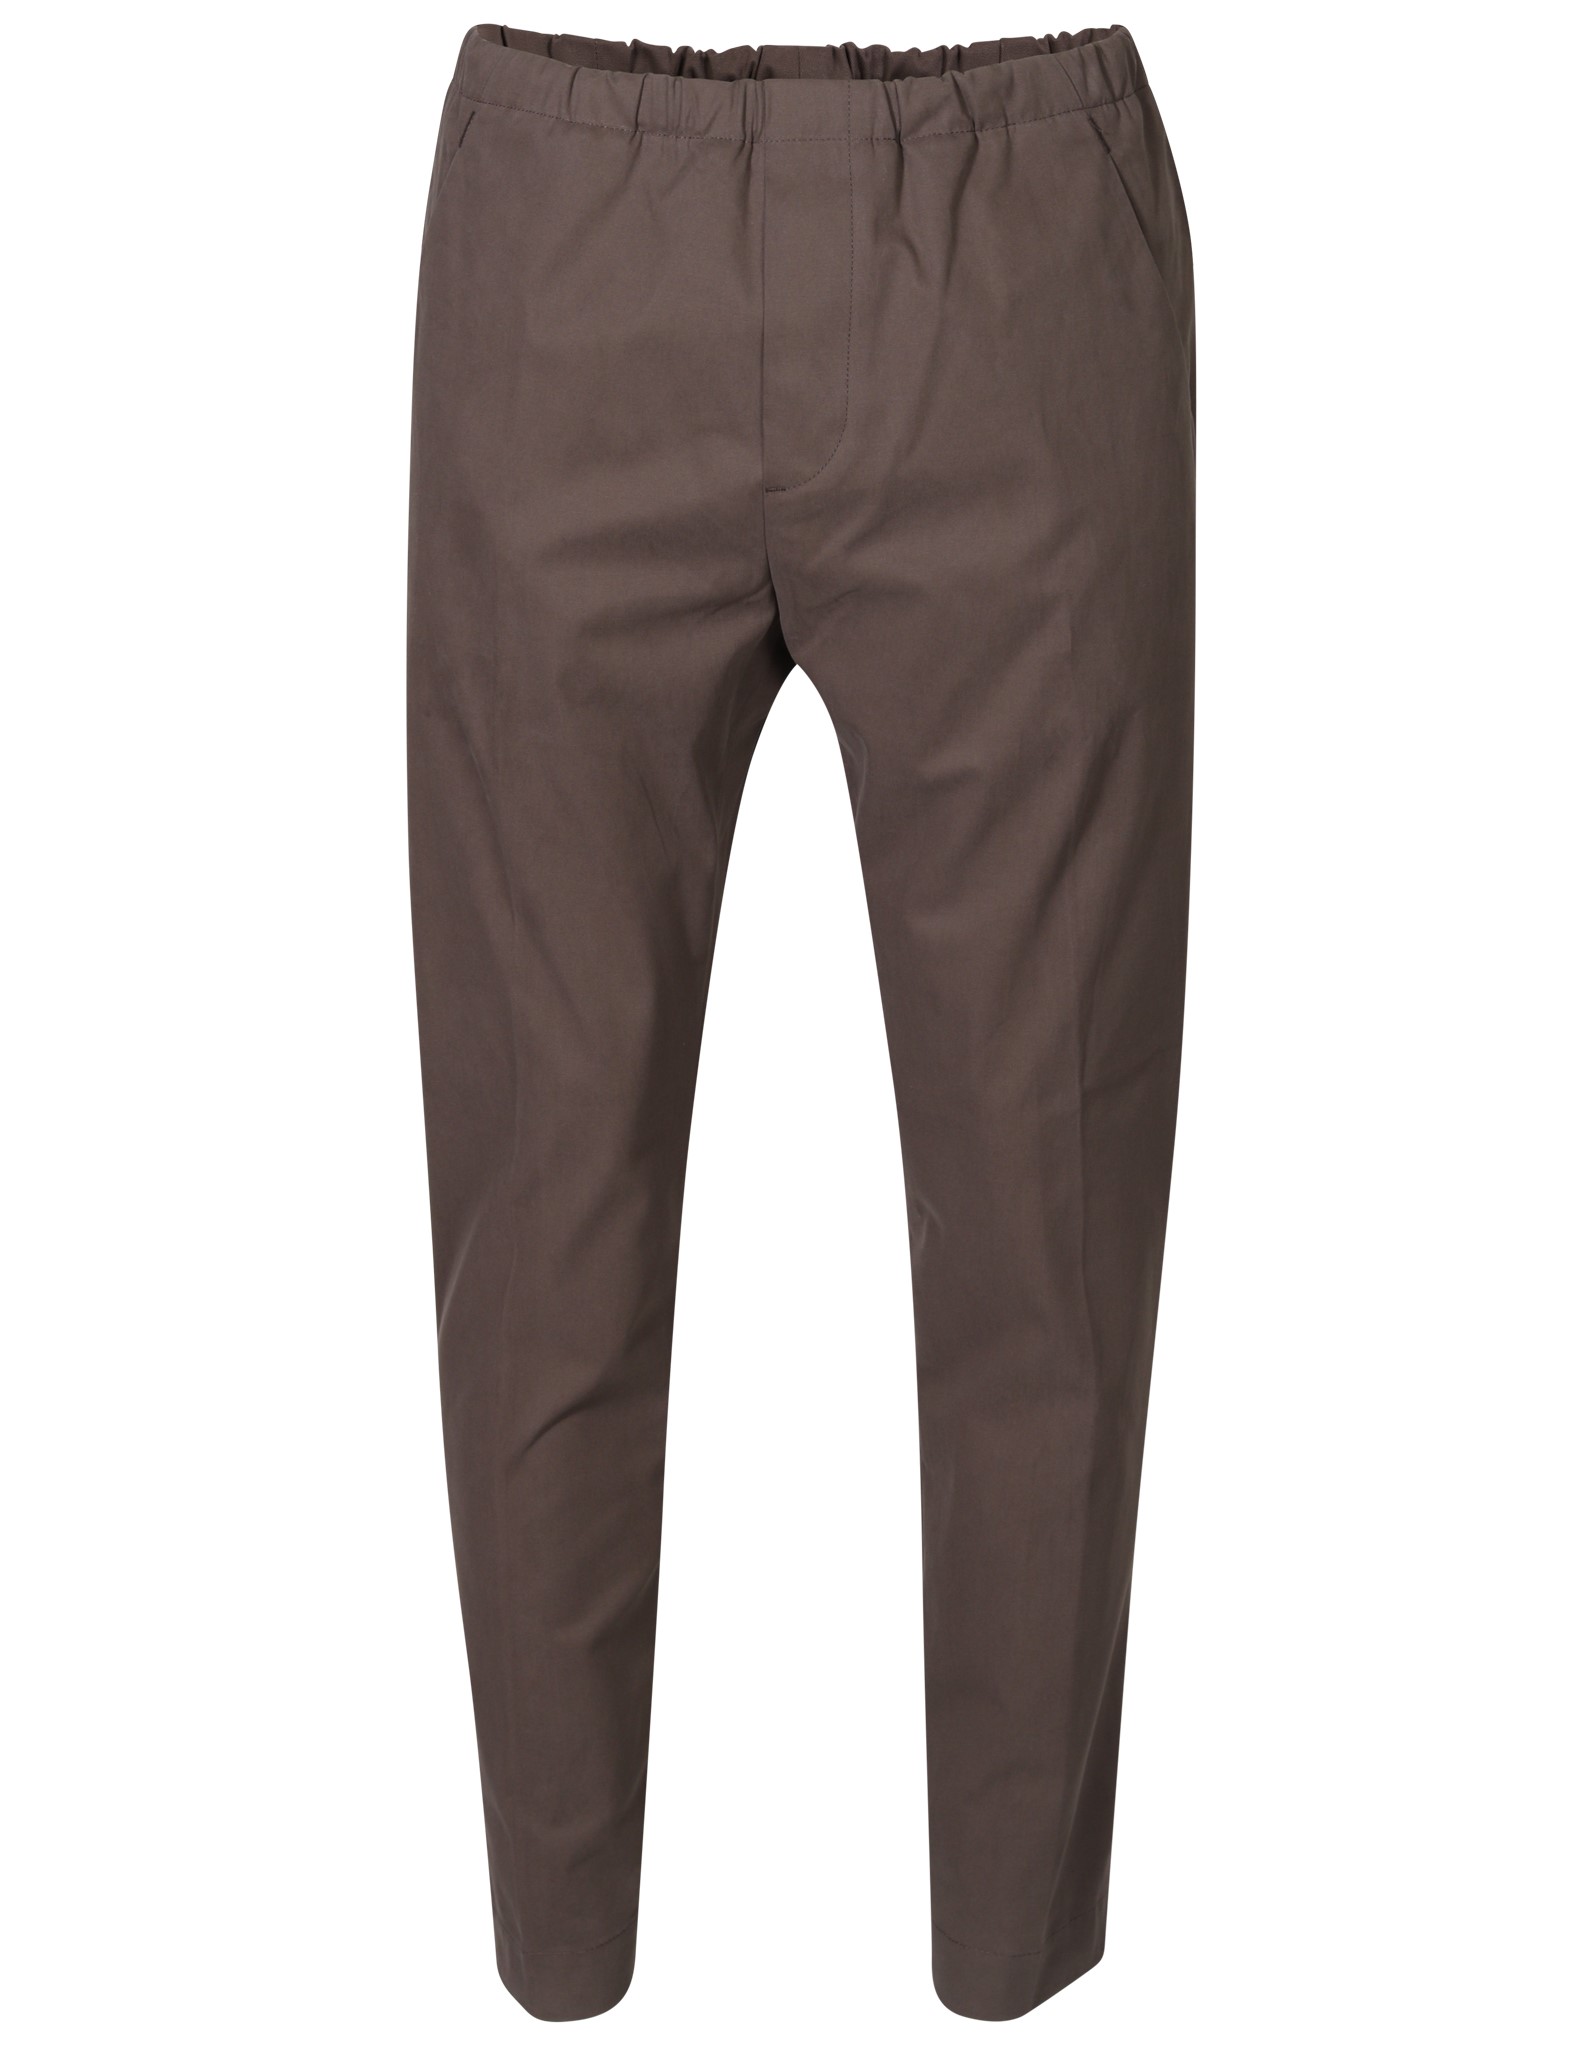 NINE:INTHE:MORNING Mirco Carrot Cotton Stretch Pant in Brown 54